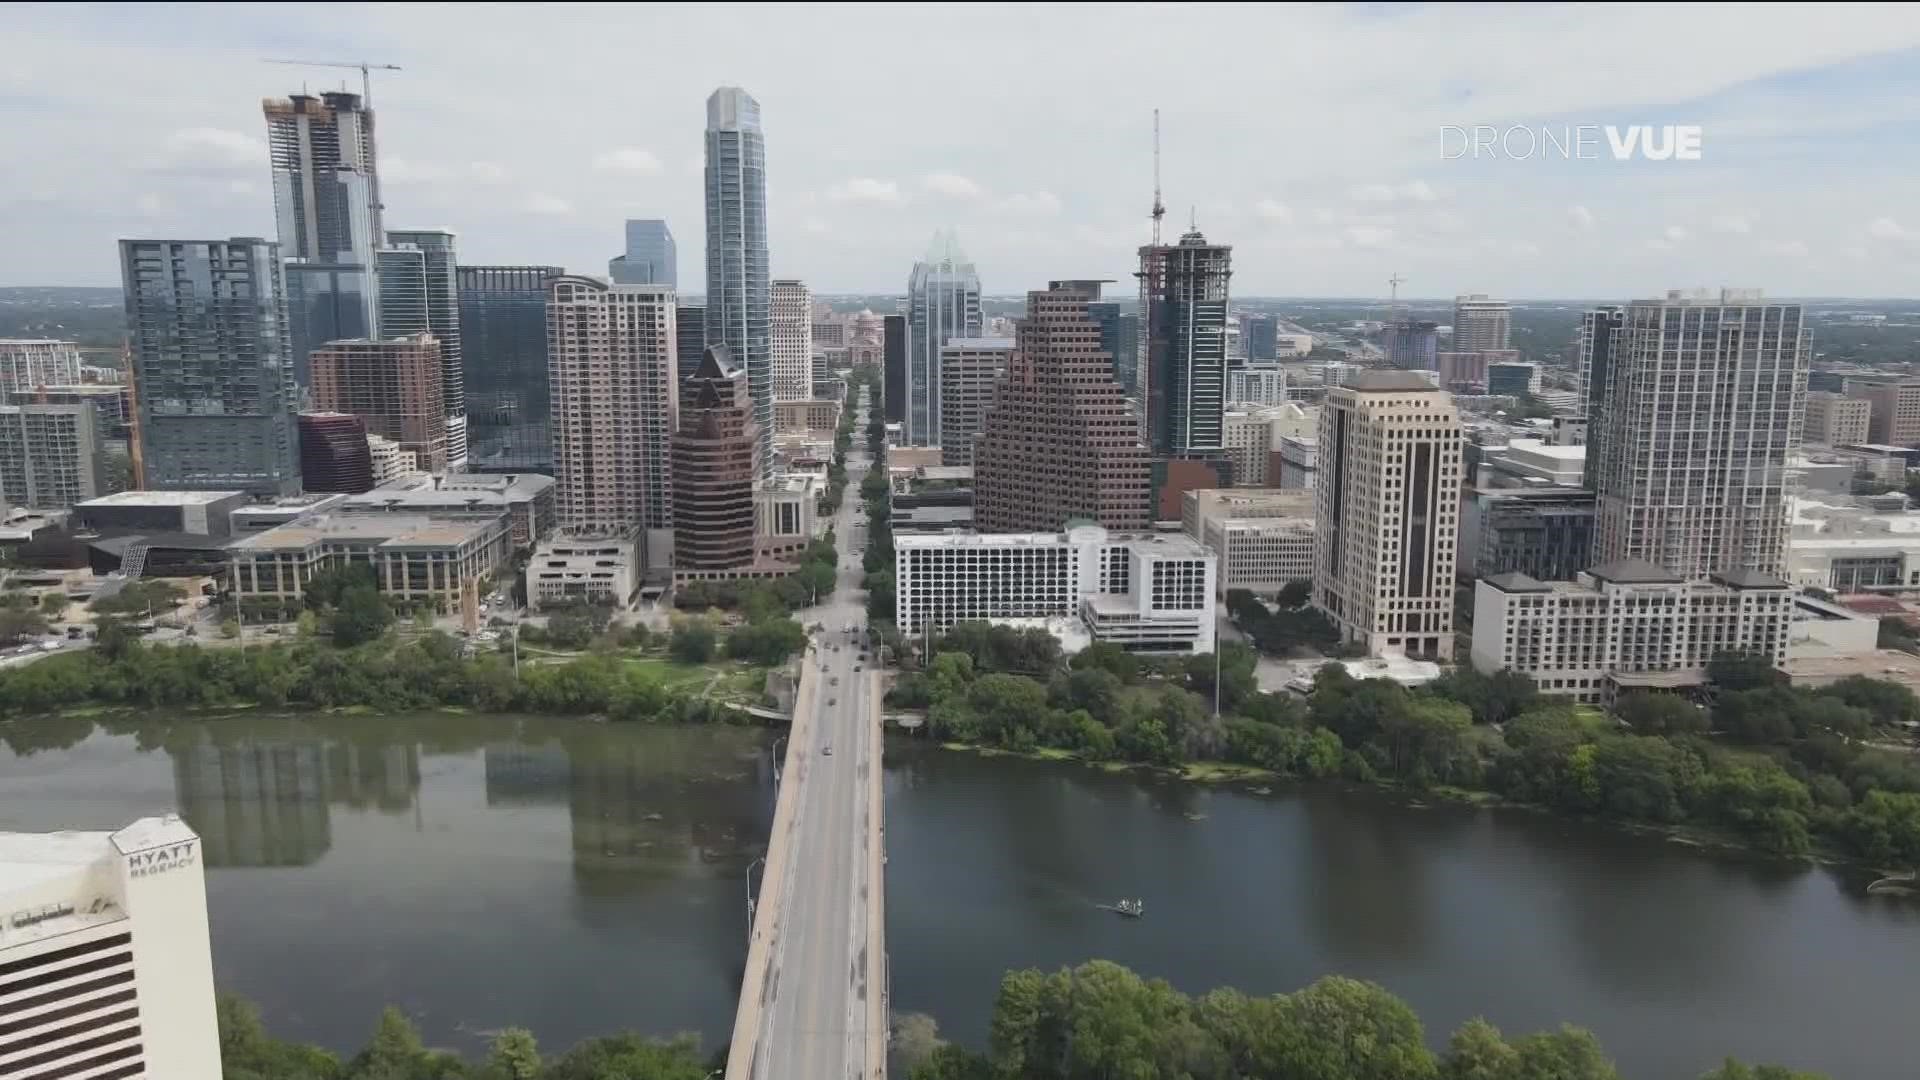 It was a busy year for growth across Central Texas. From business additions to soaring home prices and even a "cyber rodeo," our area was booming in 2022.